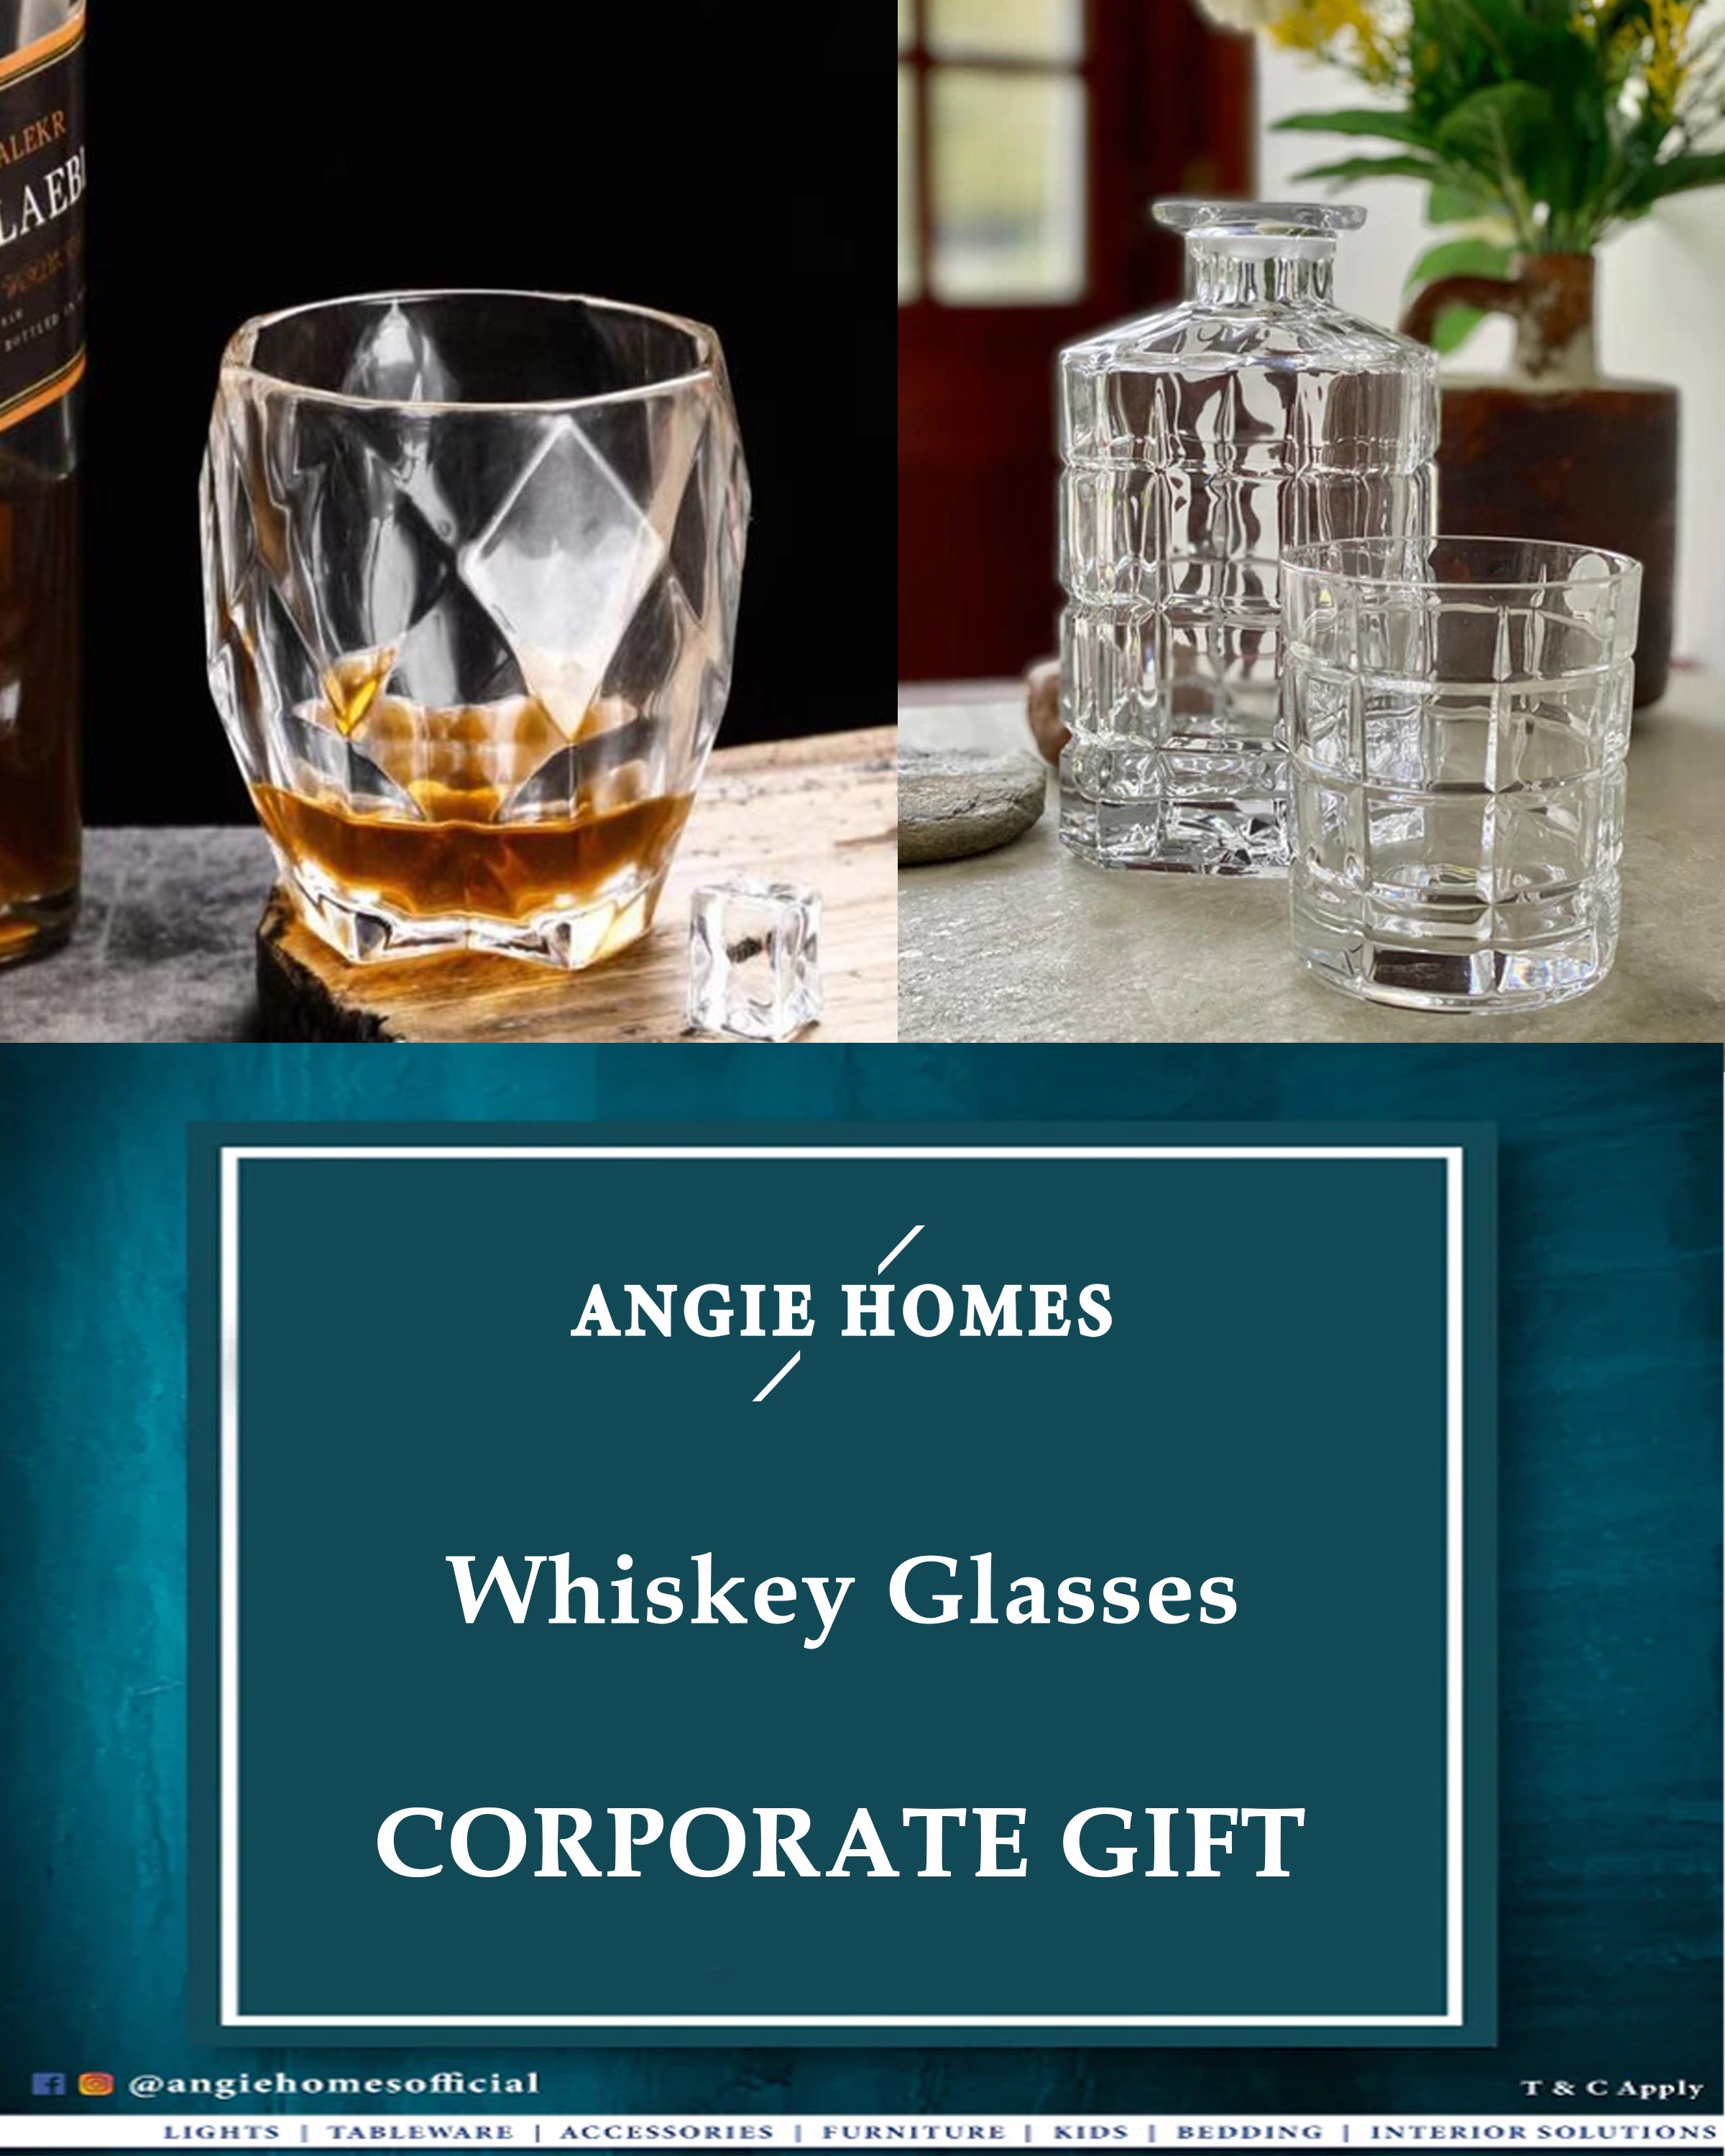 Whiskey Glasses for Weddings, House Warming & Corporate Gift ANGIE HOMES